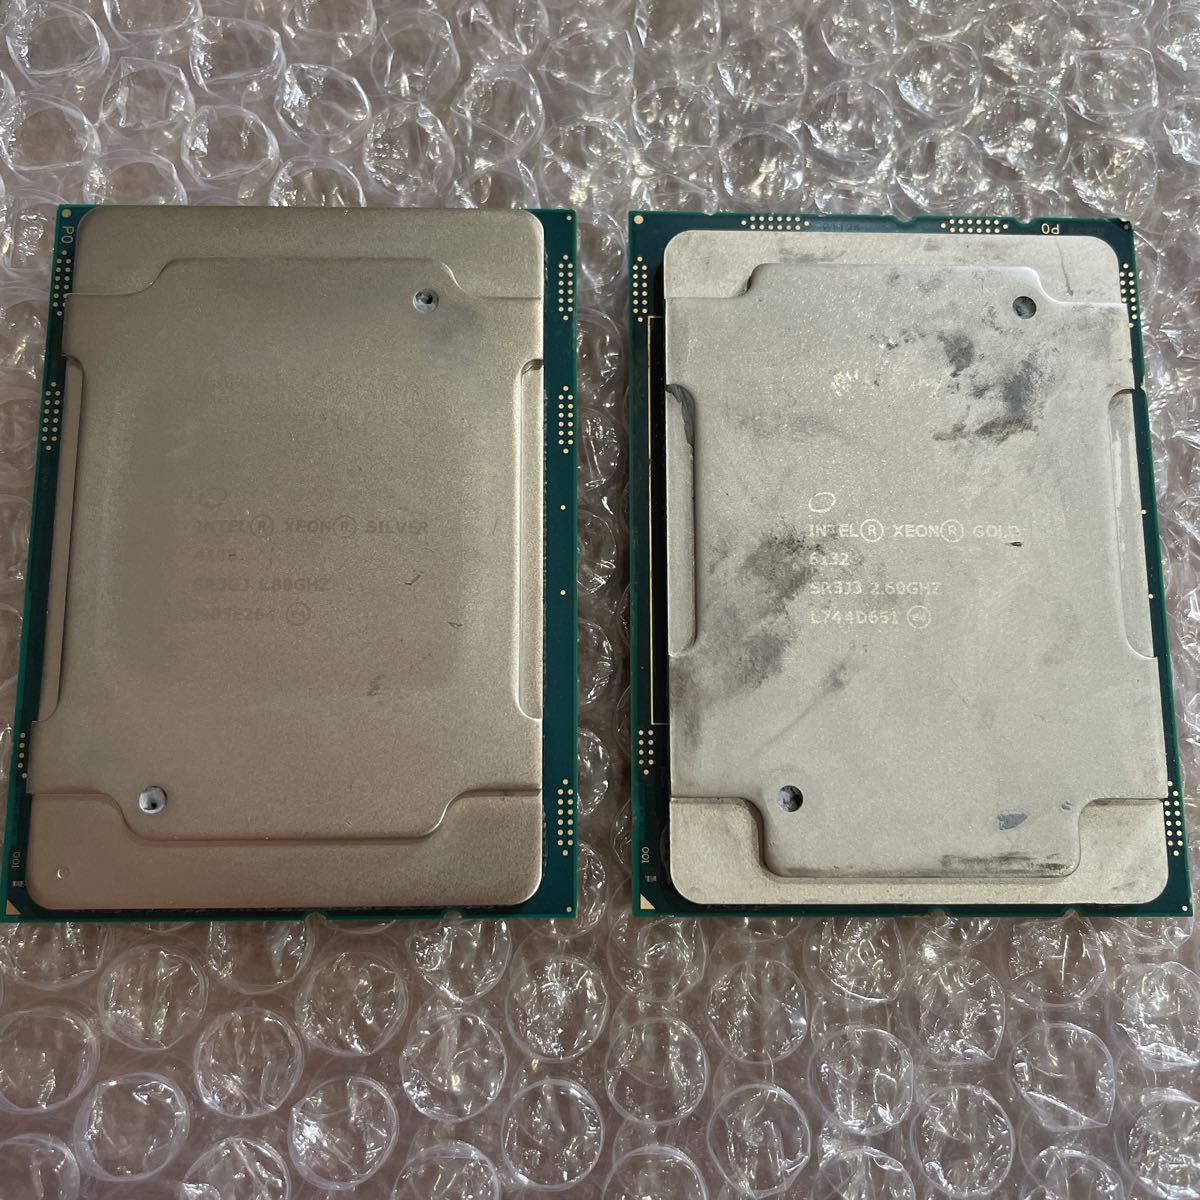  used Intel xeon Gold 6132 SR333 Silver 4108 1.80GHz SR3GJ 2 pieces set present condition goods operation not yet verification 